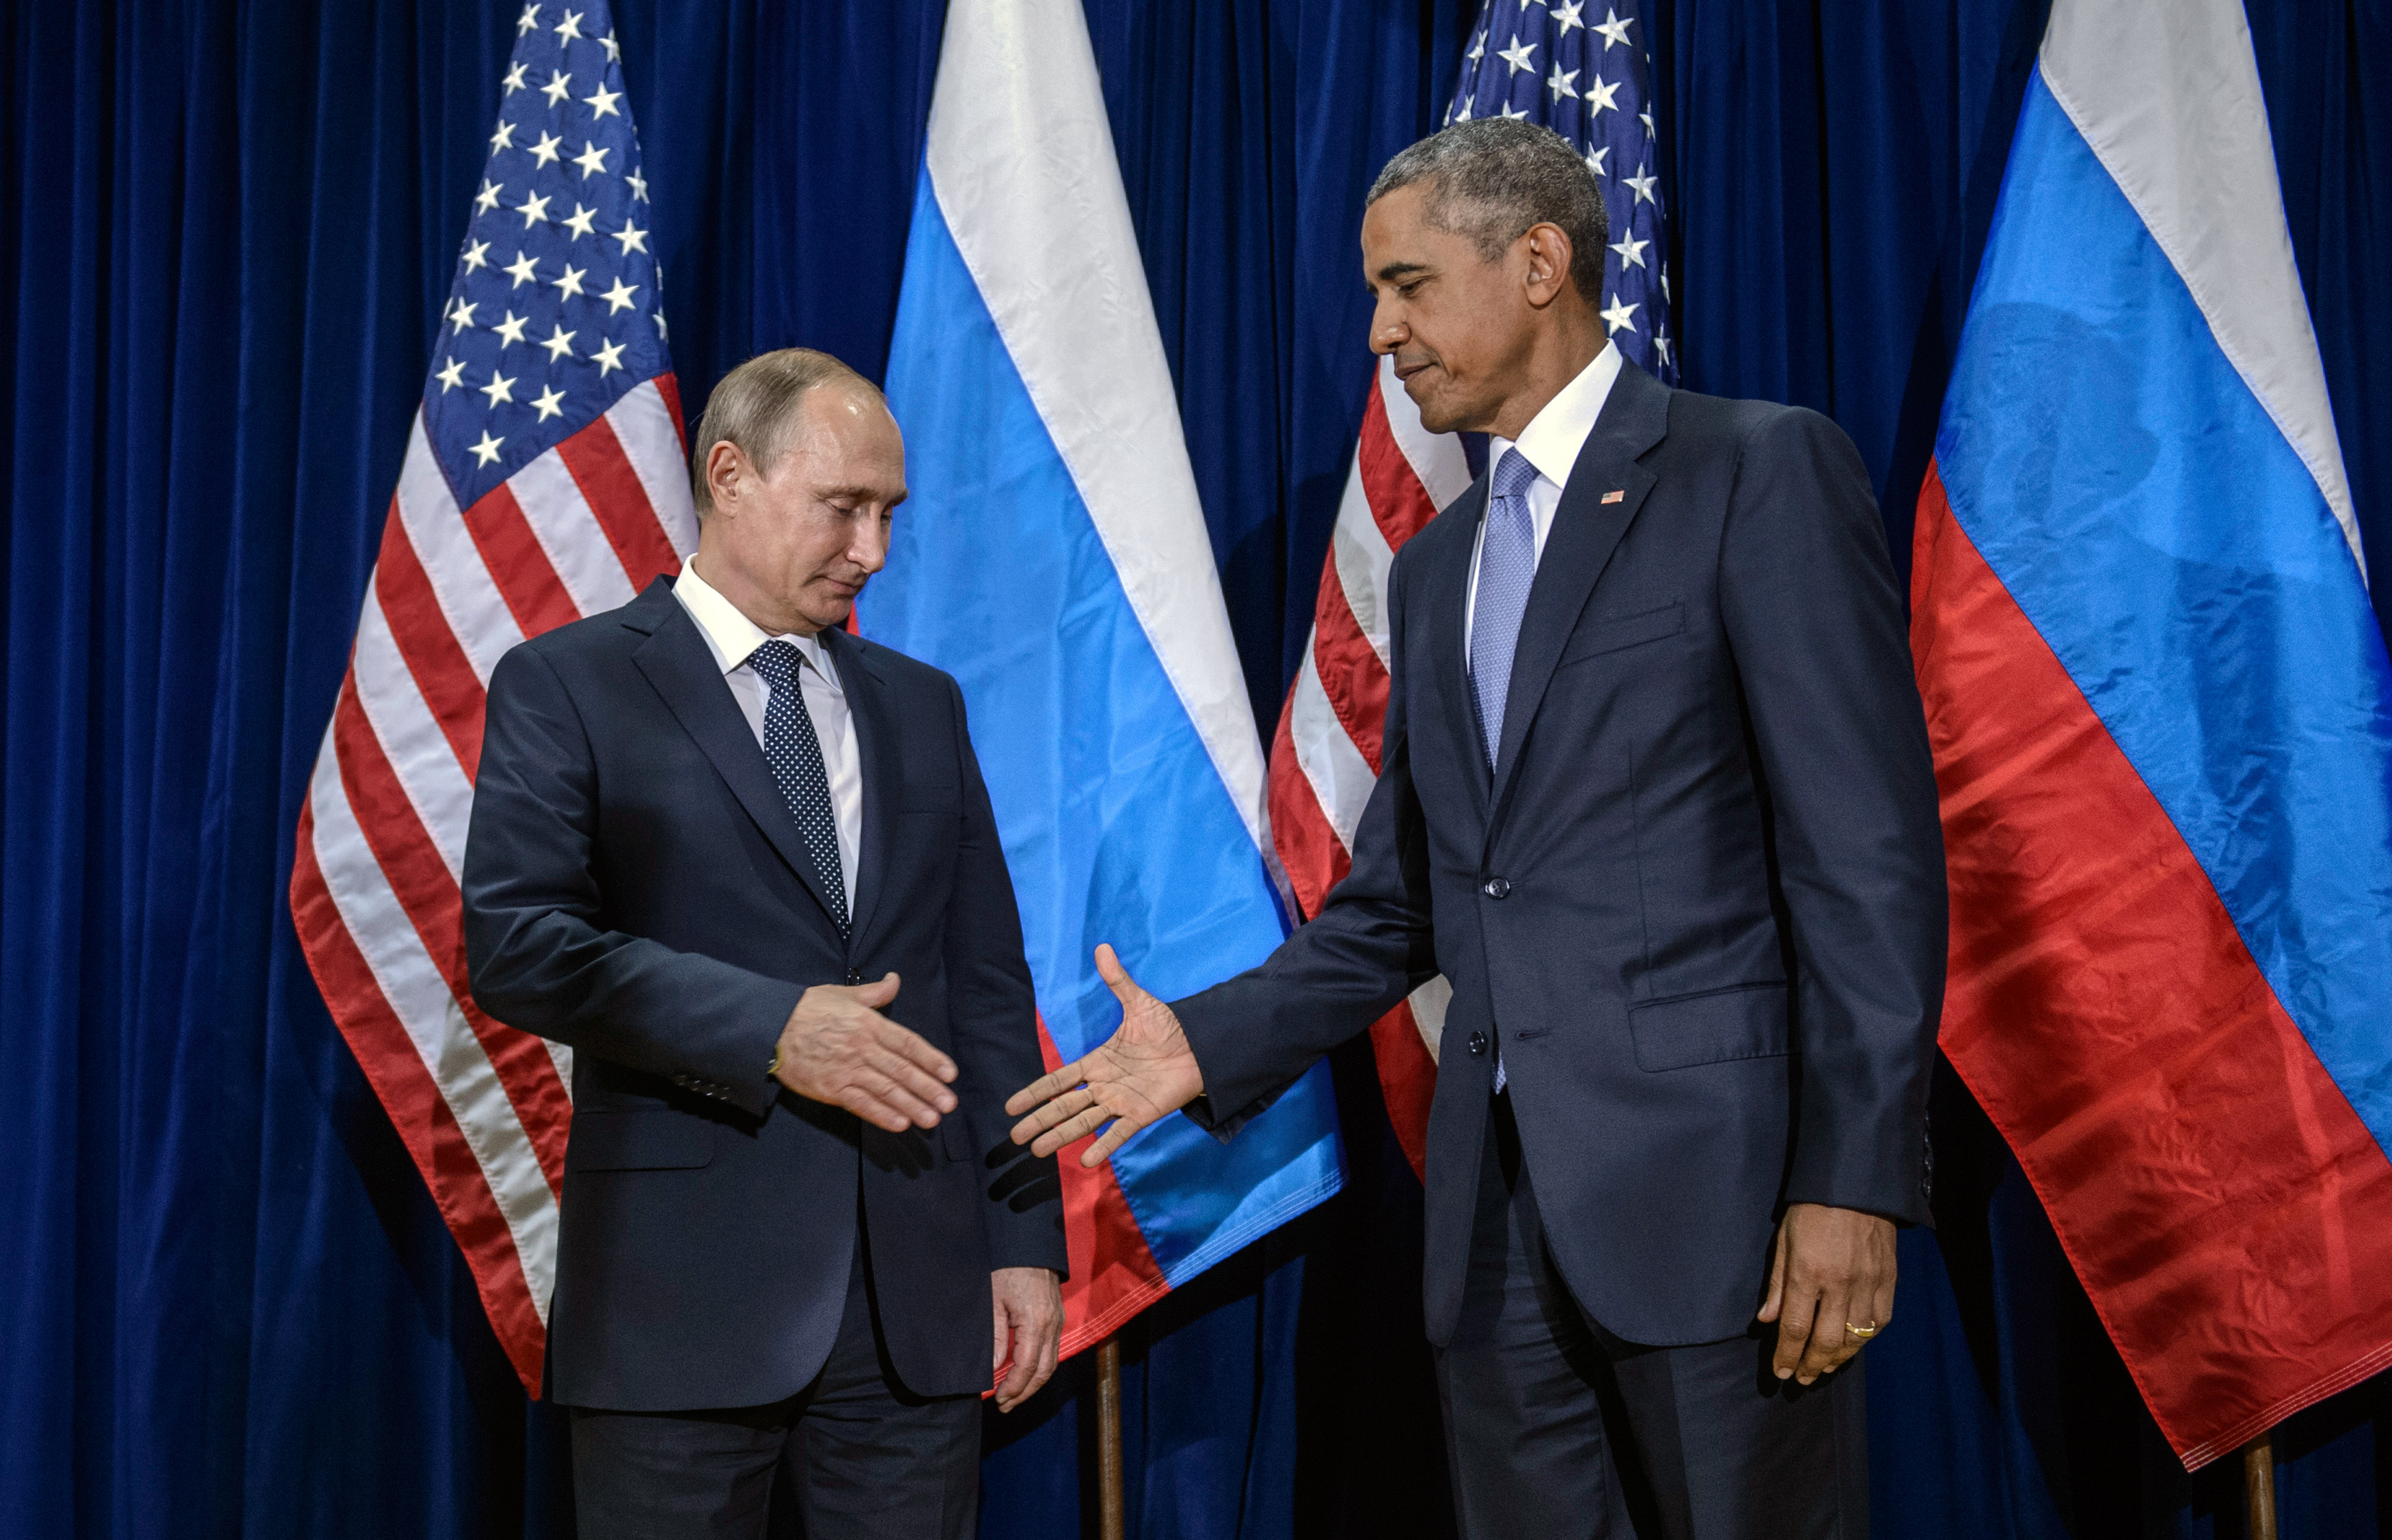 Russian President Vladimir Putin (L) and U.S. President Barack Obama shake hands for the cameras before the start of a bilateral meeting at the United Nations headquarters in New York City on Sept. 28, 2015. (Kommersant via Getty Images)